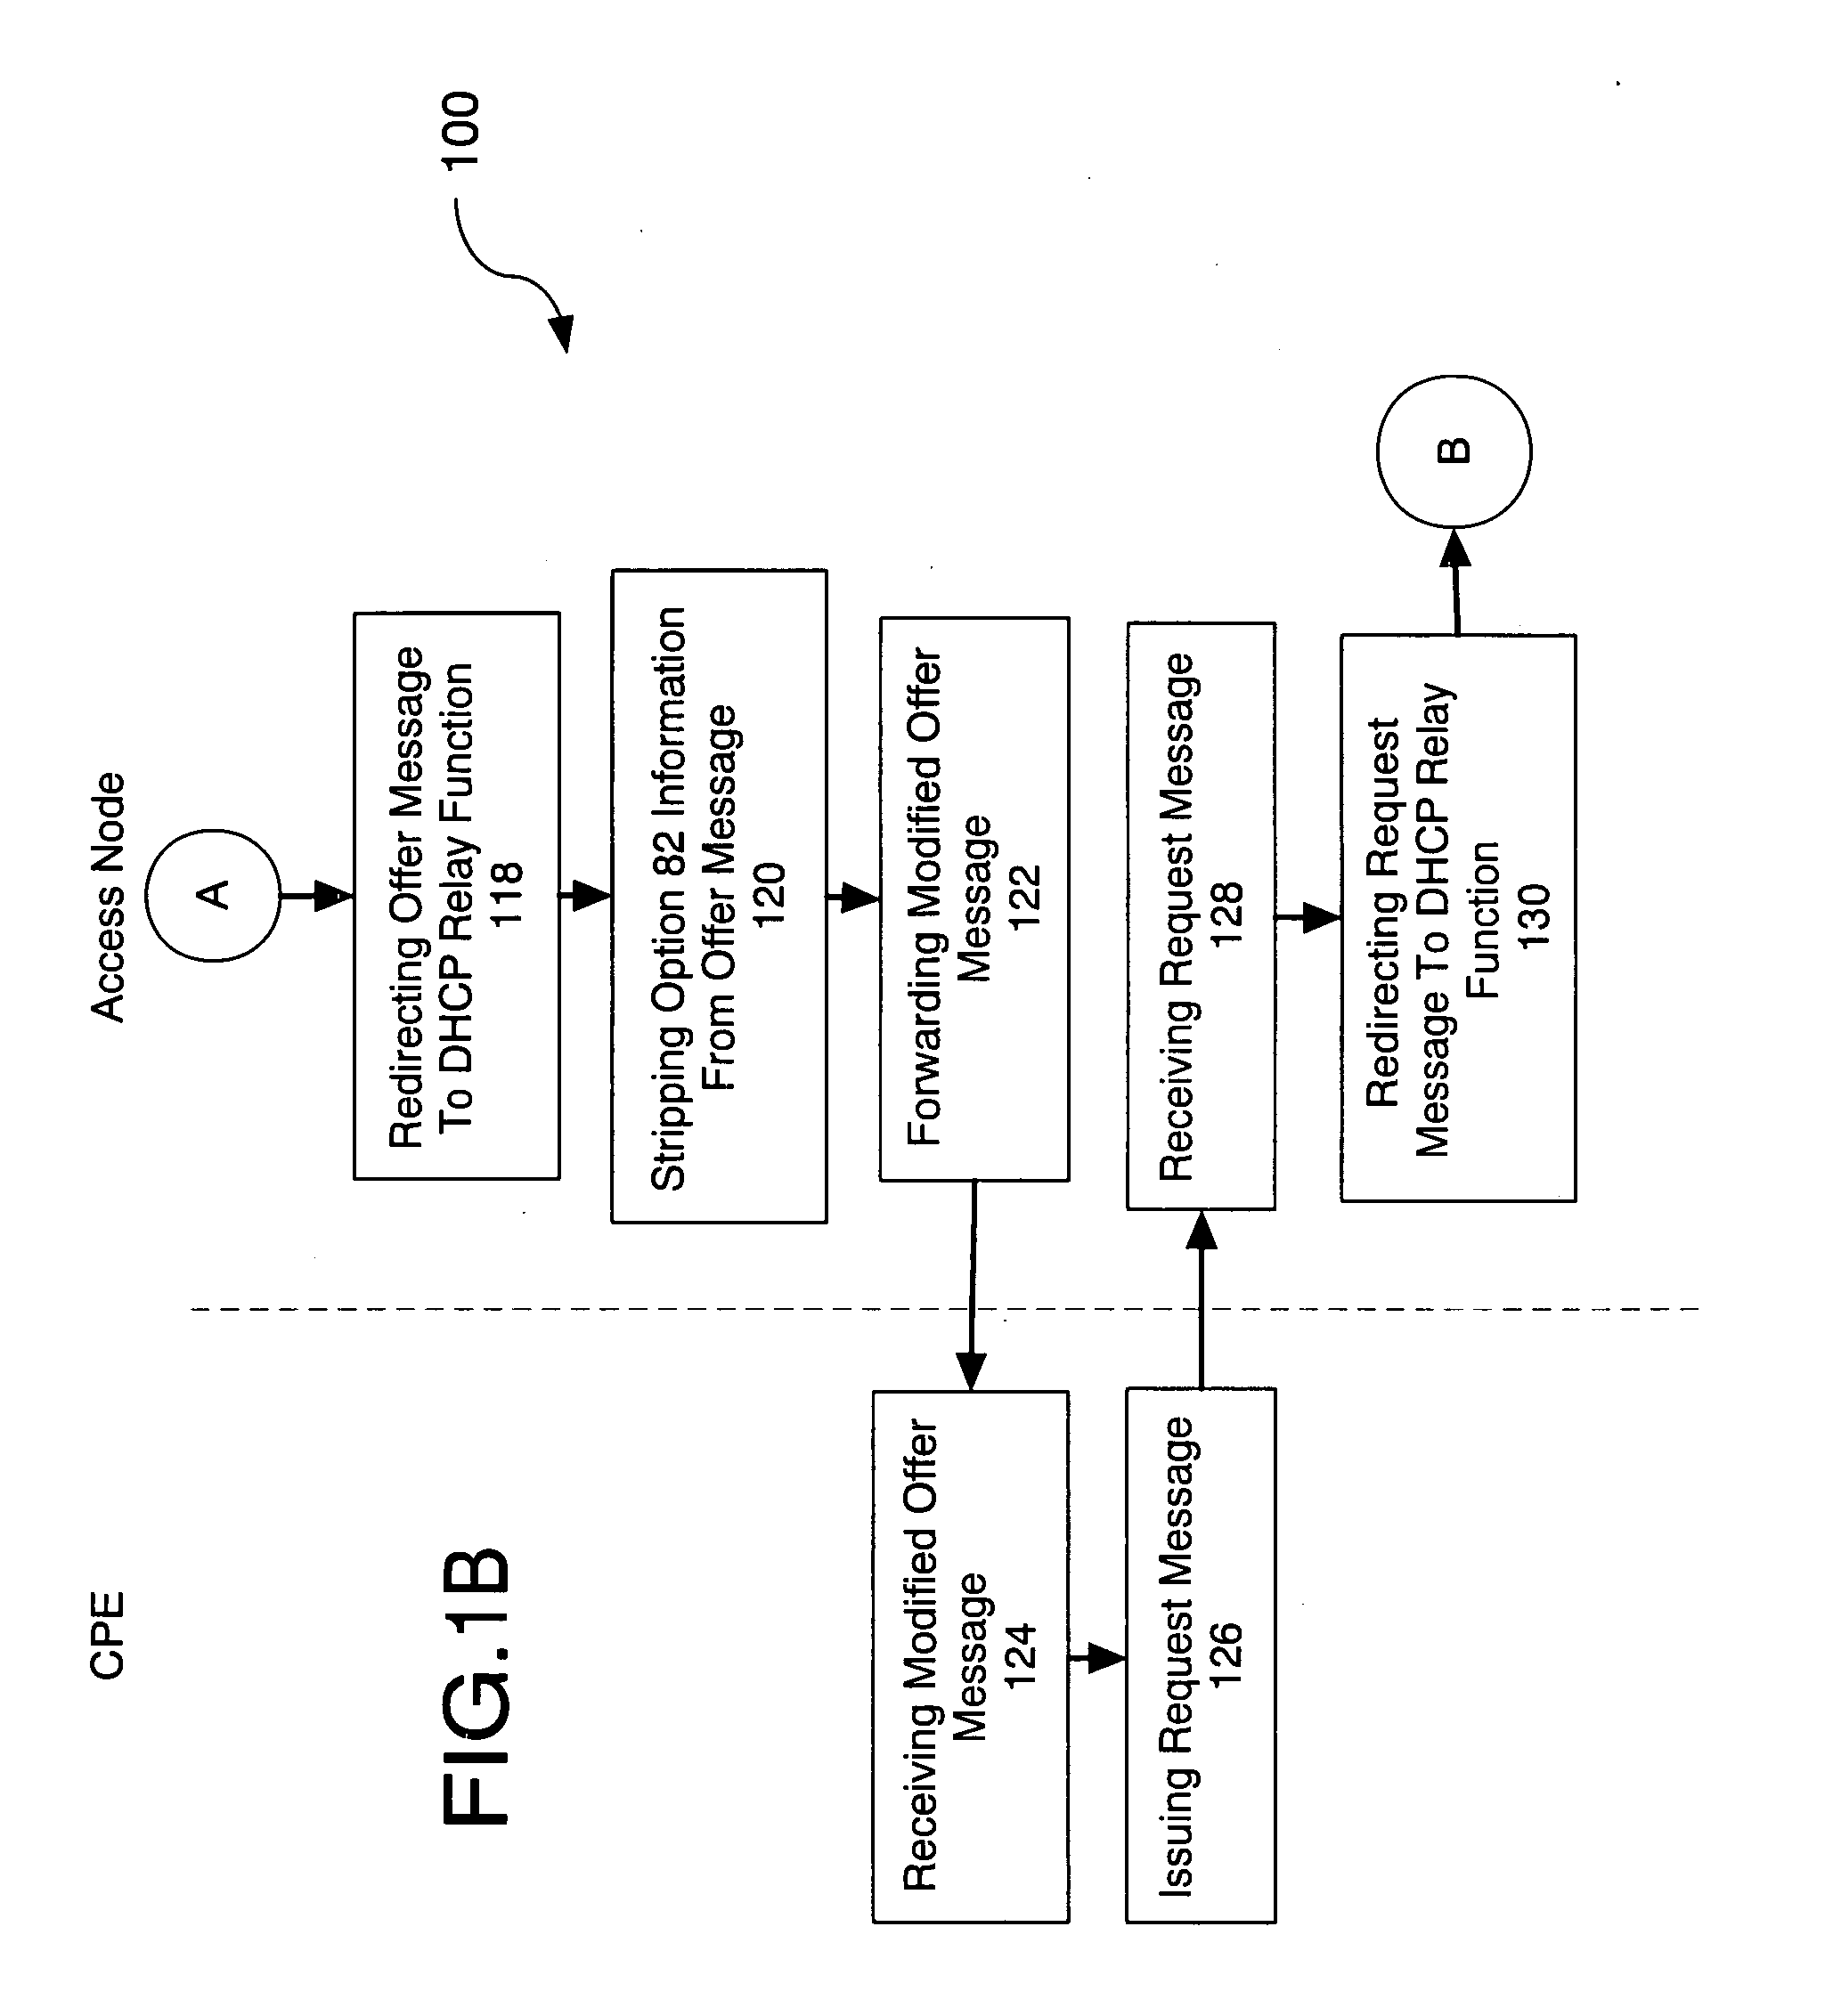 Method and system configured for facilitating residential broadband service